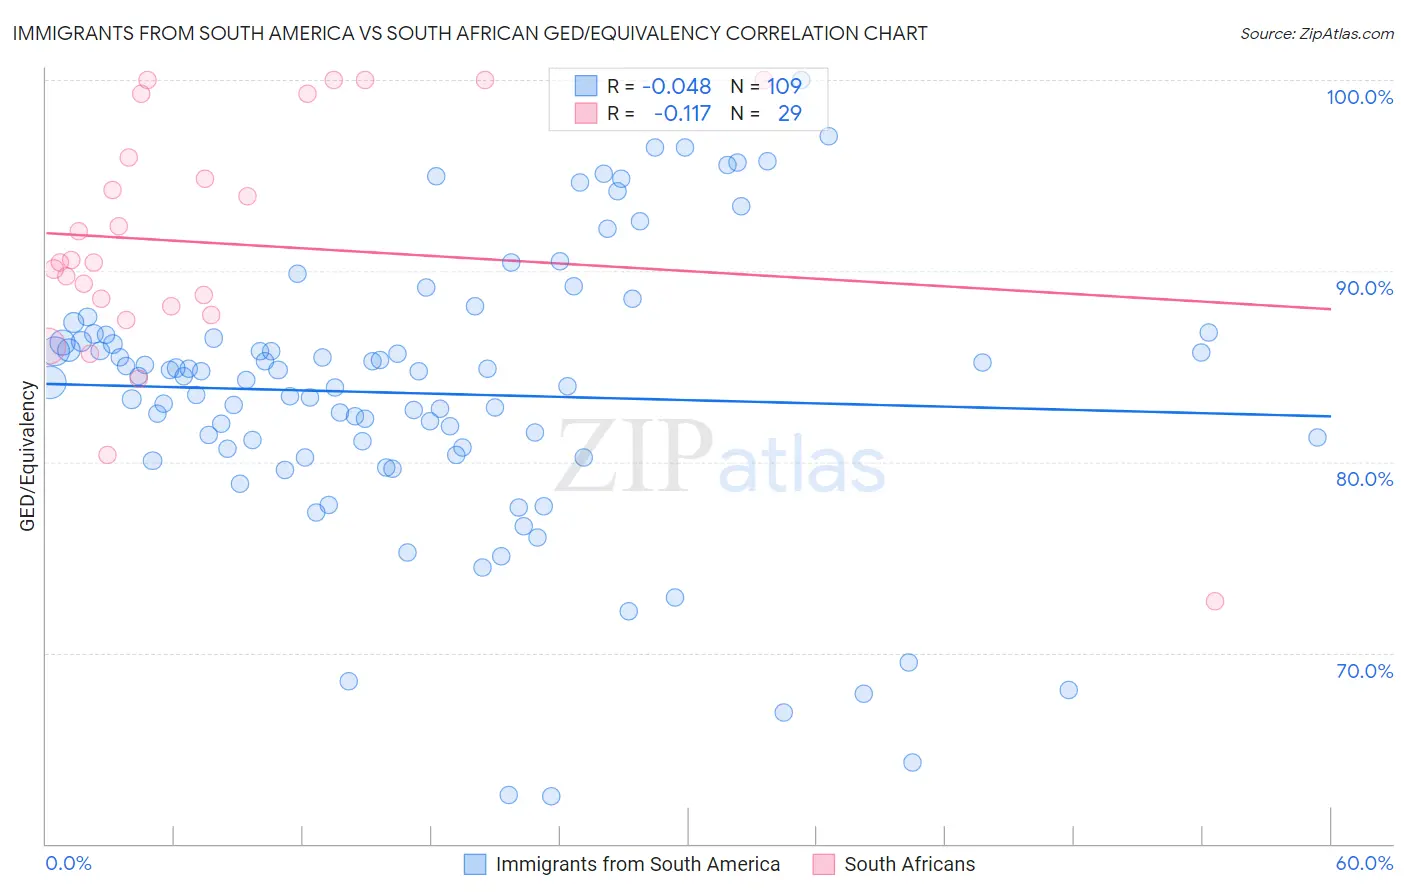 Immigrants from South America vs South African GED/Equivalency